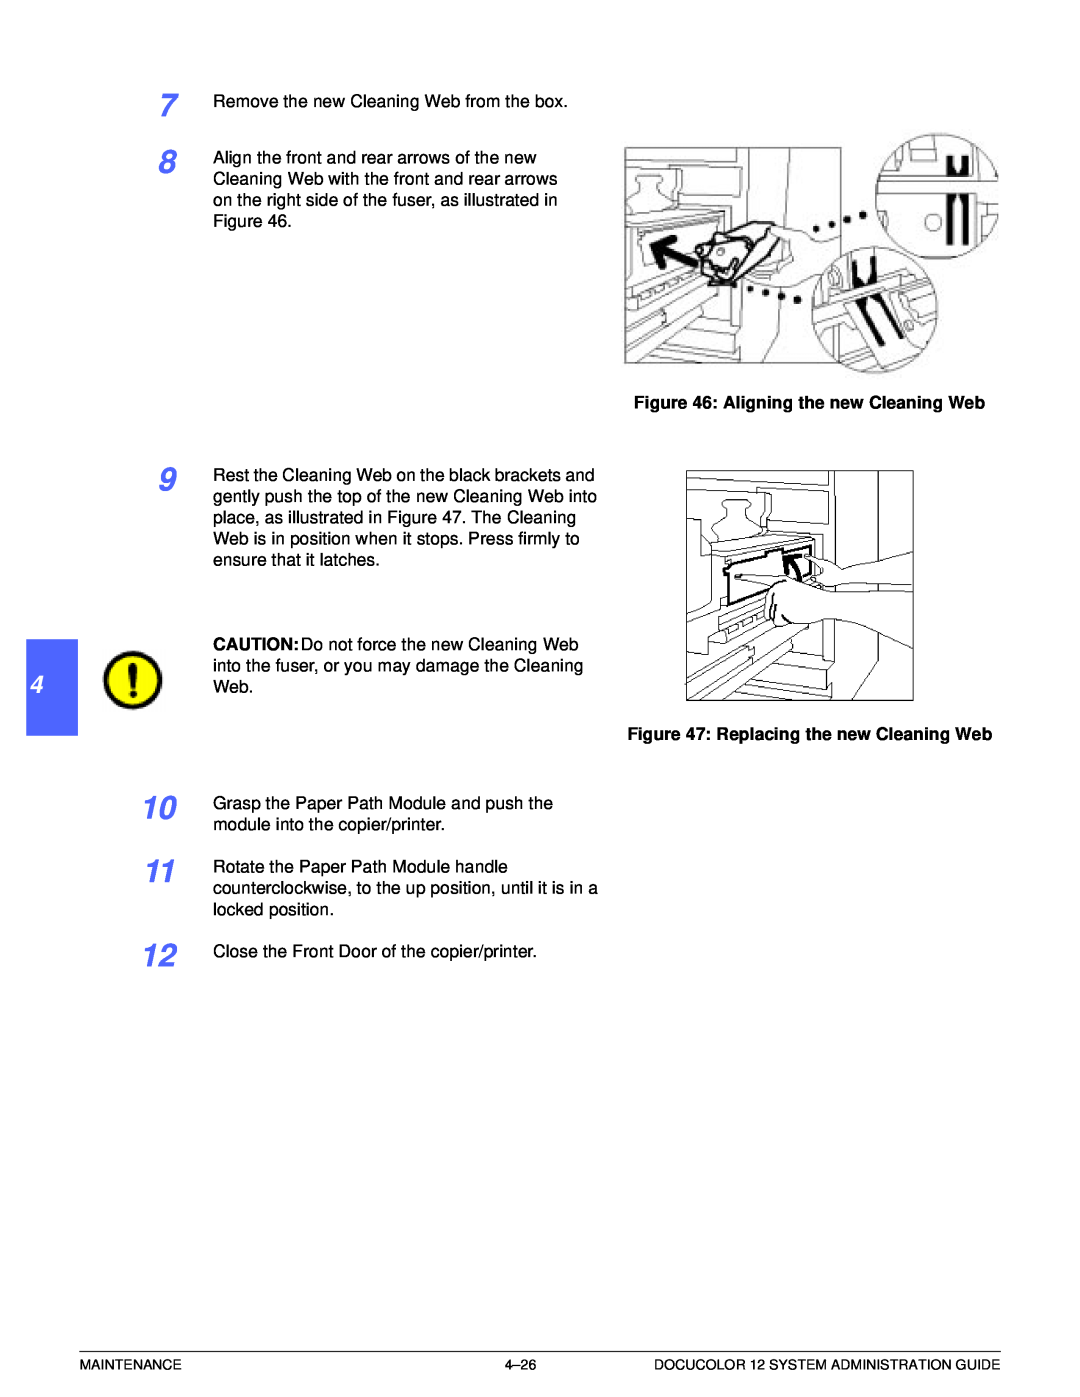 Xerox a2 manual 1 2 3 4 5 6 7, Aligning the new Cleaning Web, Replacing the new Cleaning Web 